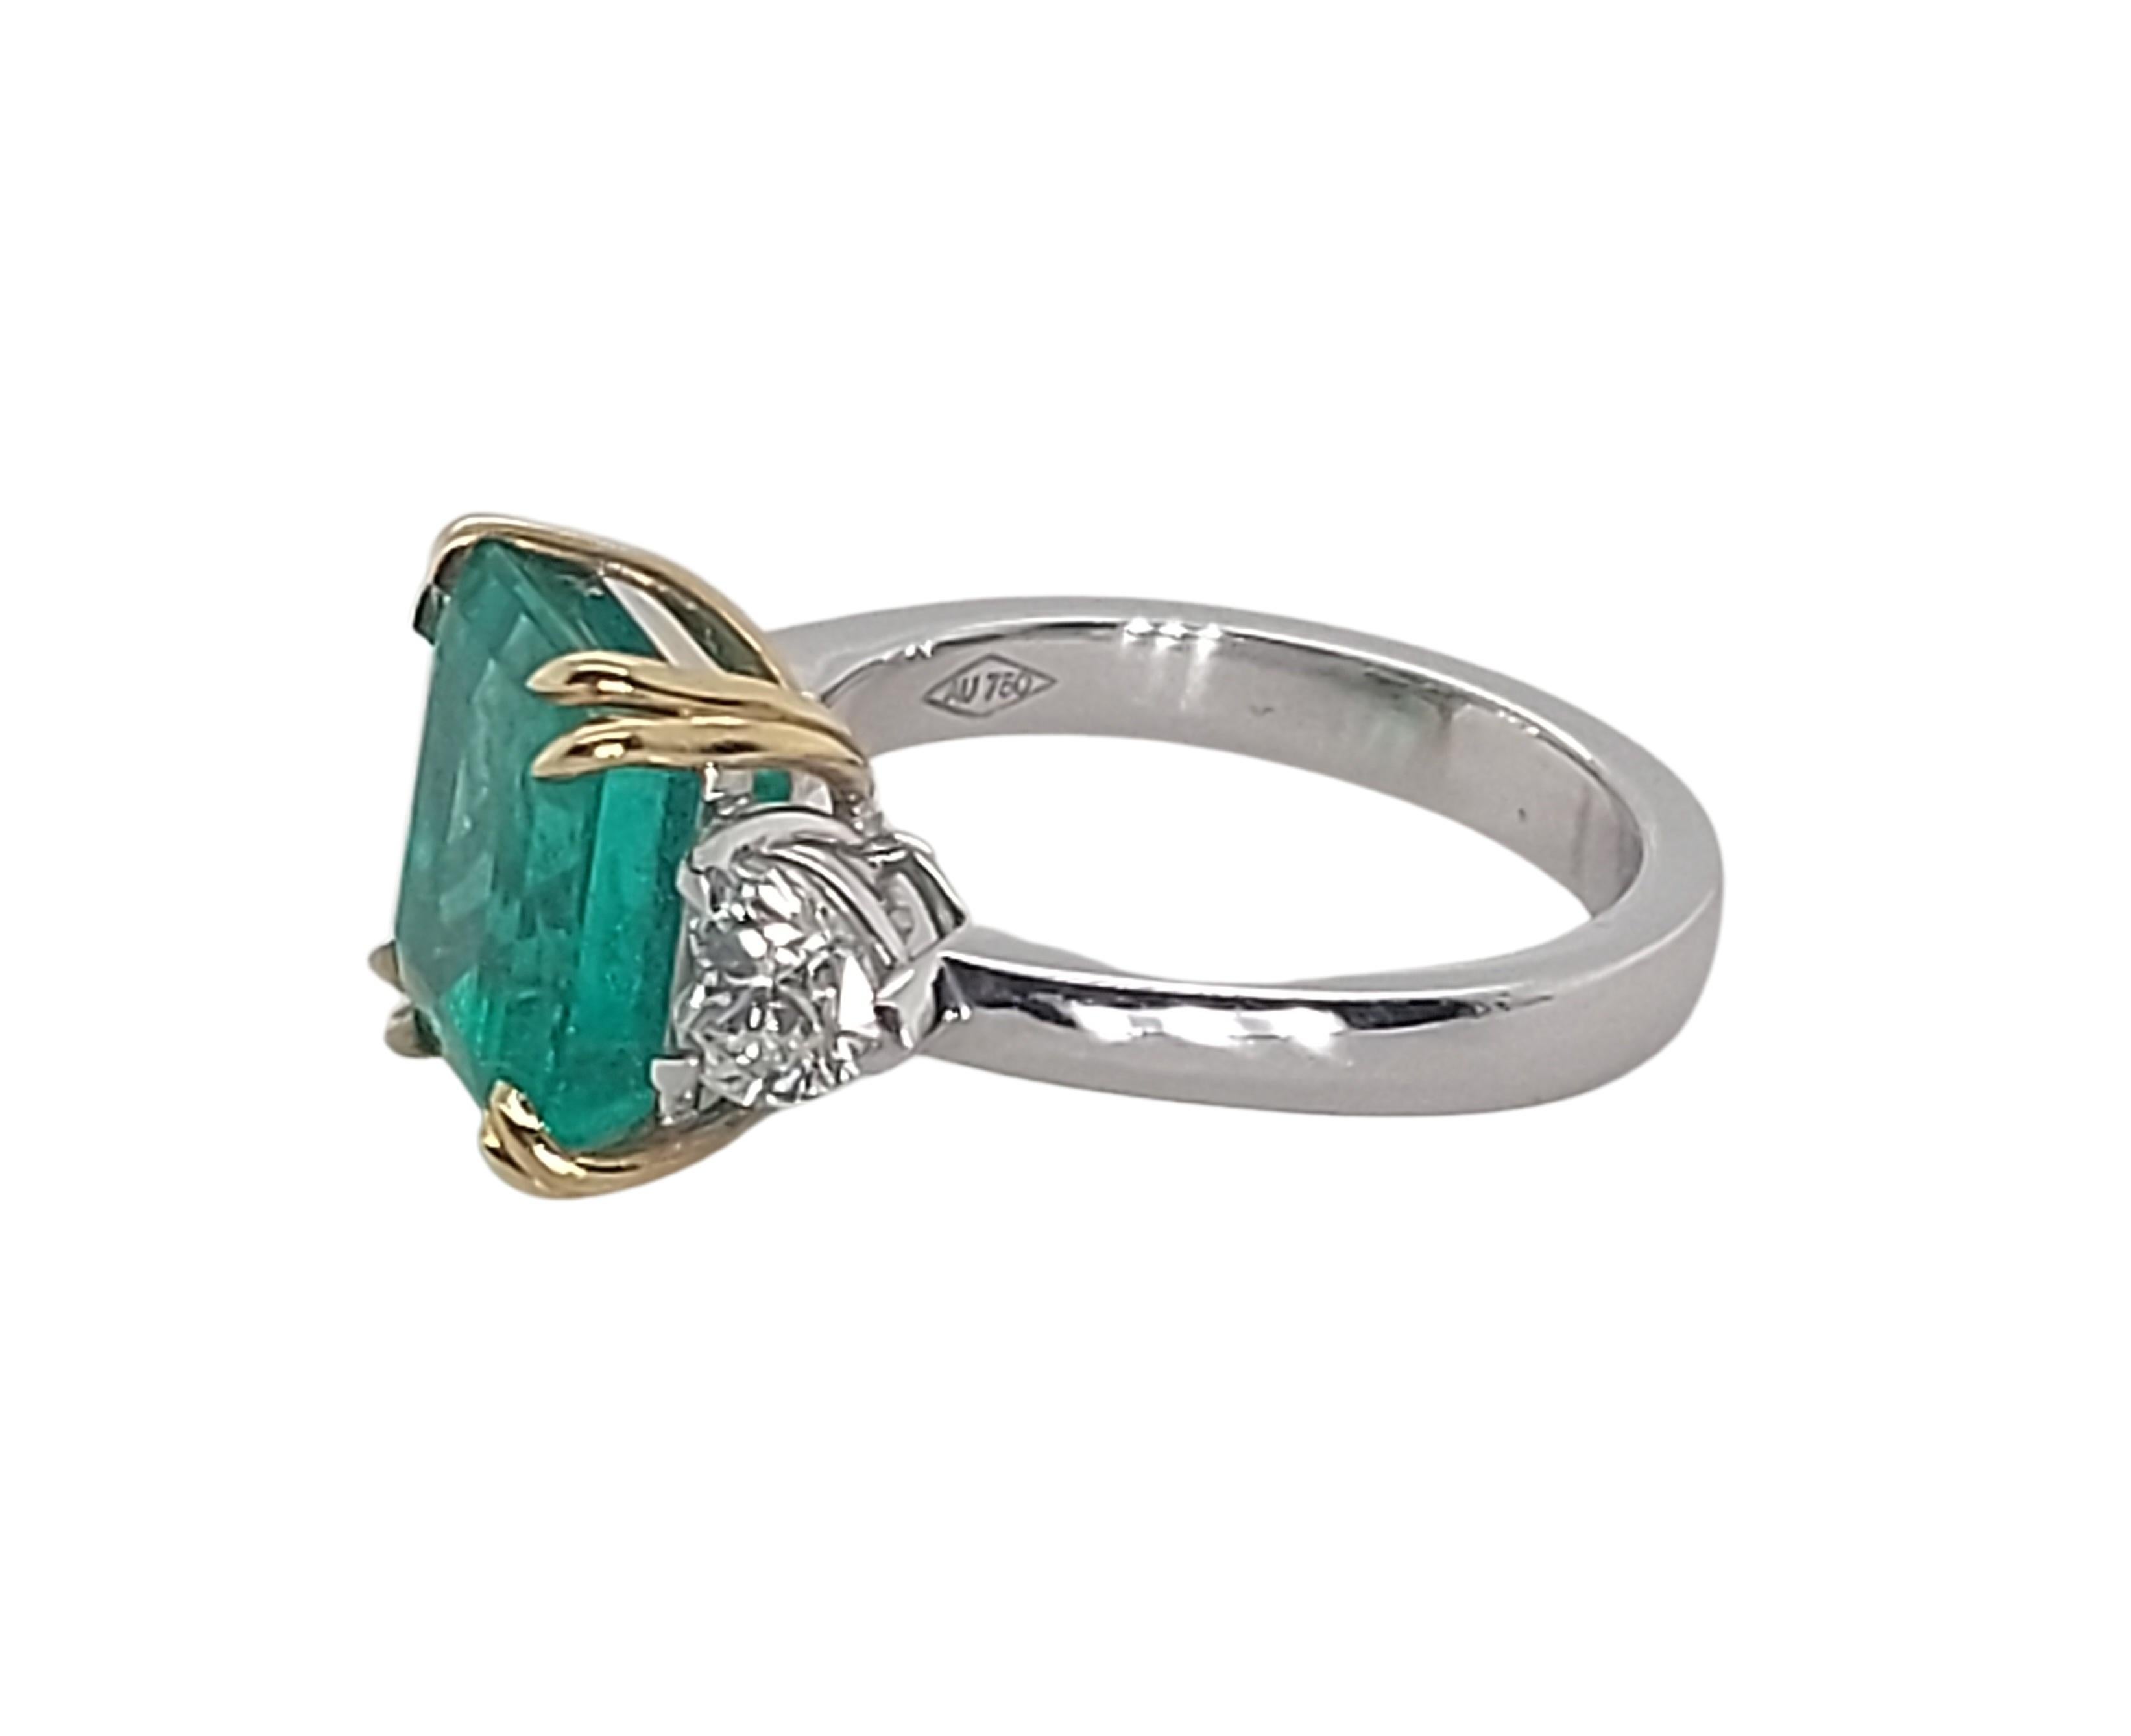 18kt White Gold Ring Wth 5.23ct Colombian Emerald & 0.93ct Heart Shaped Diamonds For Sale 2